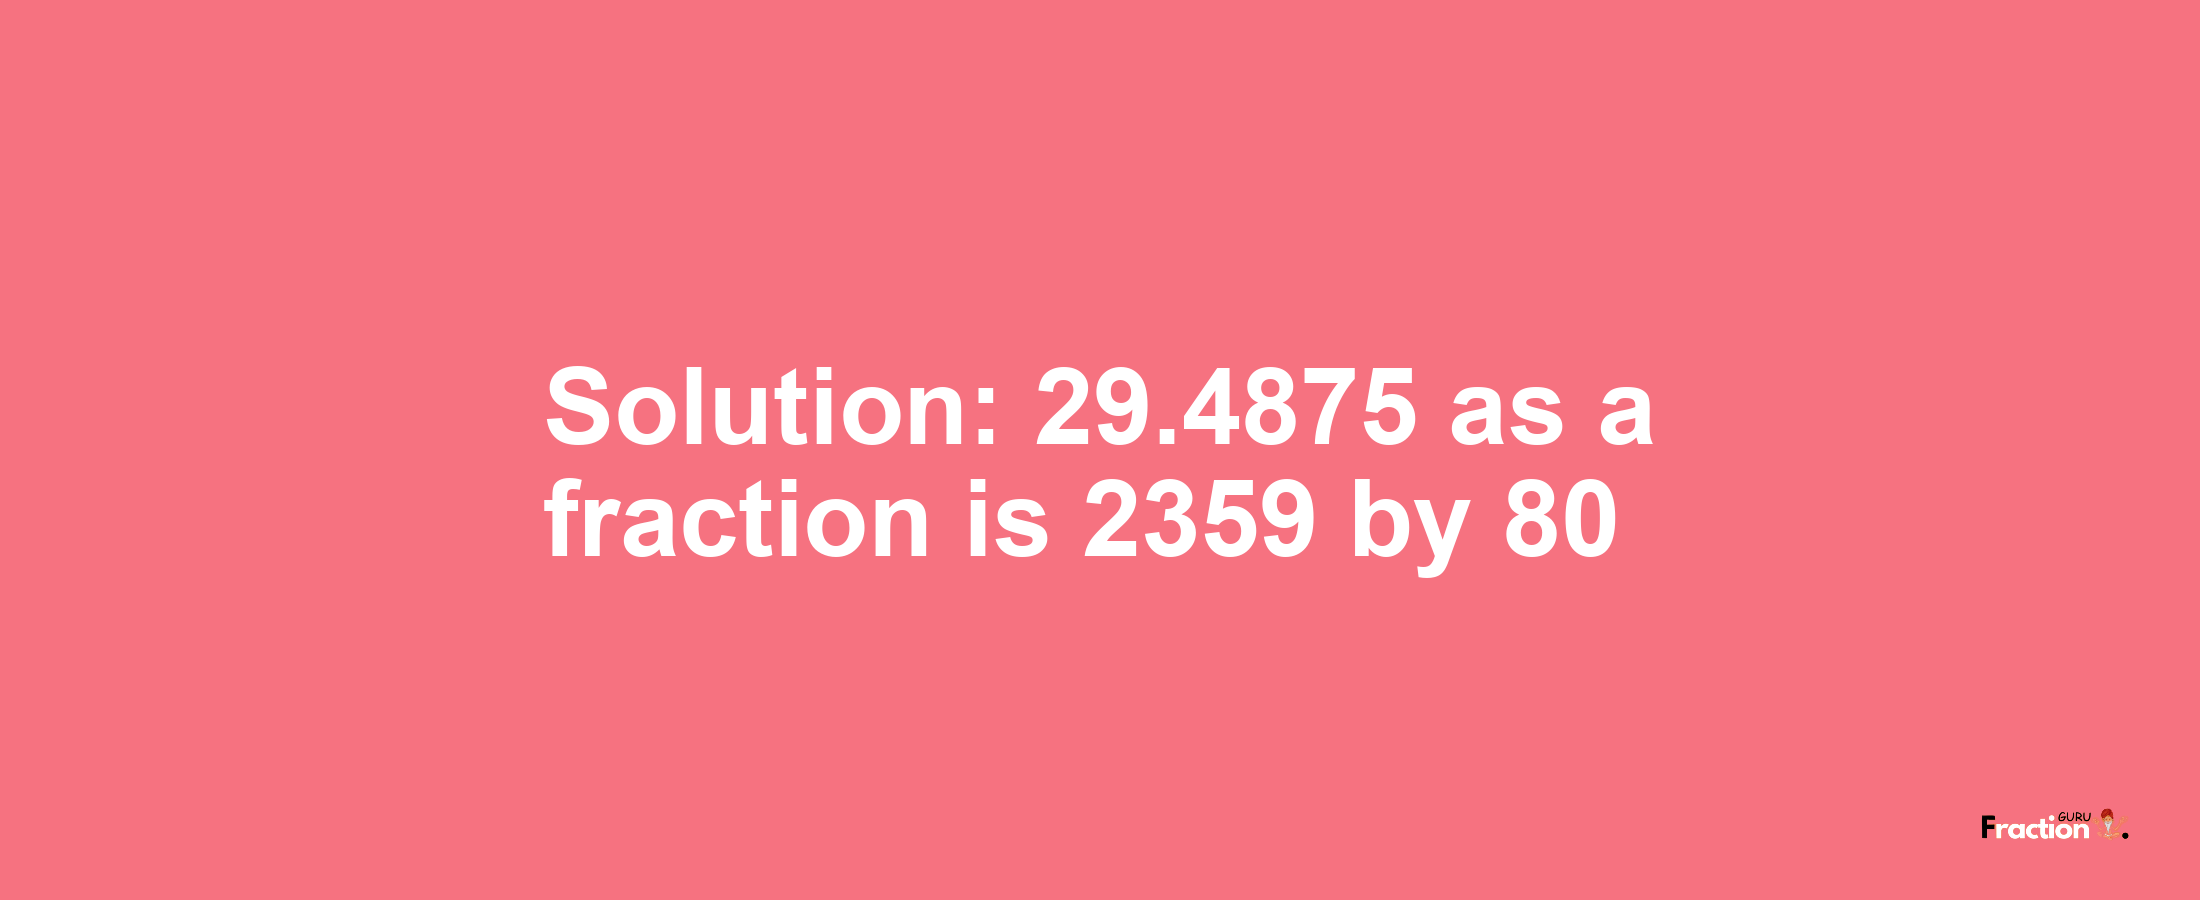 Solution:29.4875 as a fraction is 2359/80